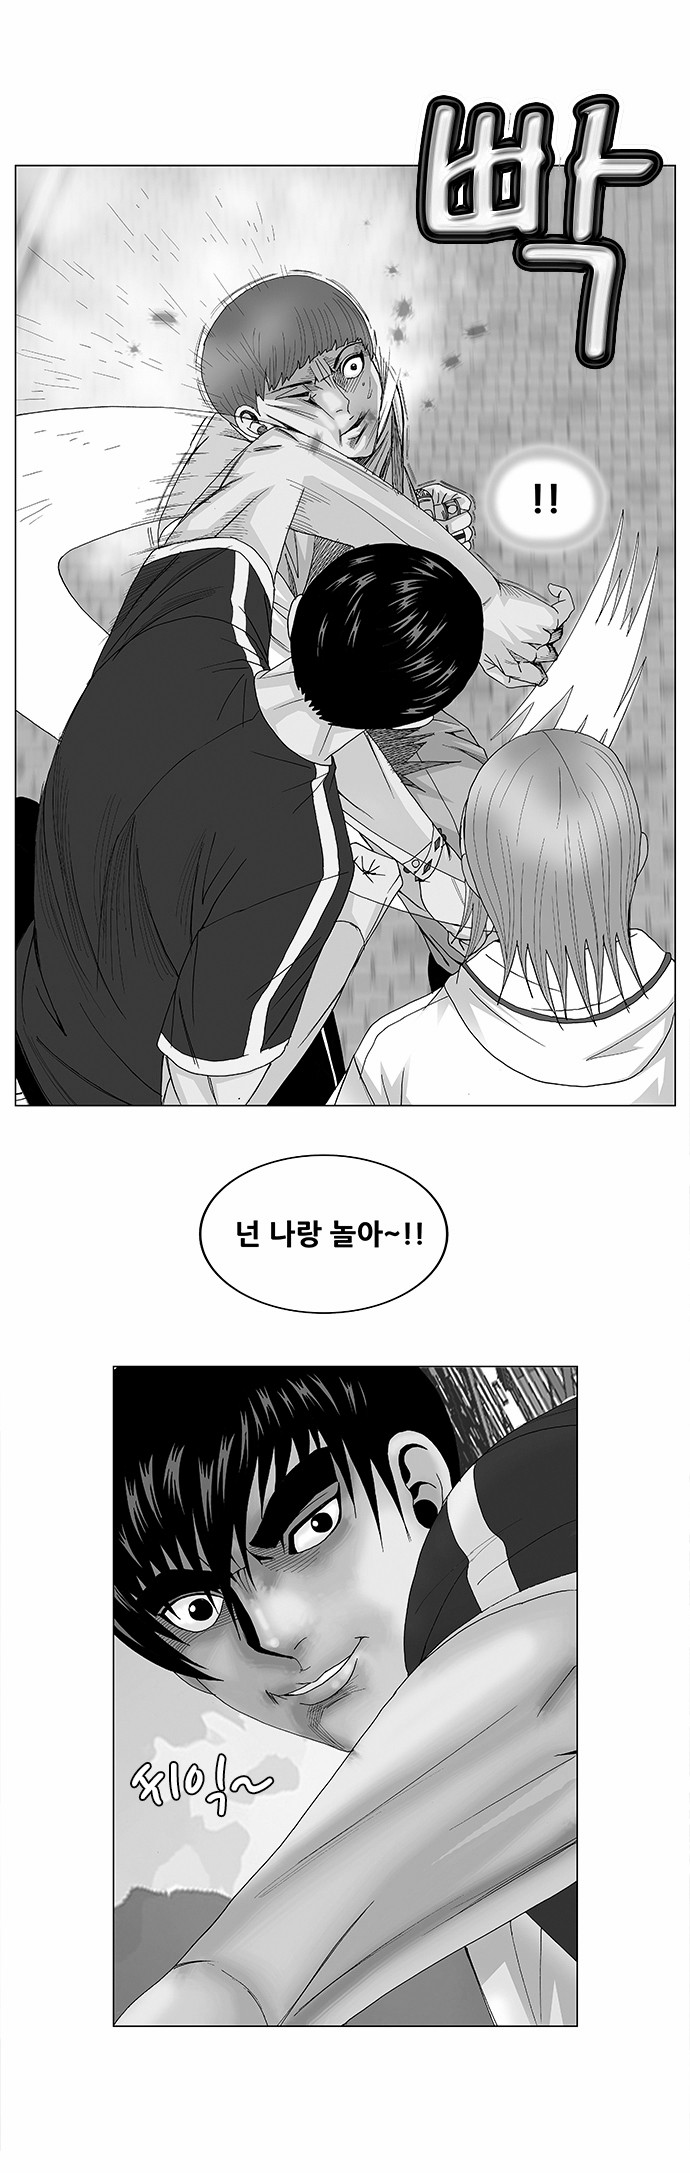 Ultimate Legend - Kang Hae Hyo - Chapter 96 - Page 1